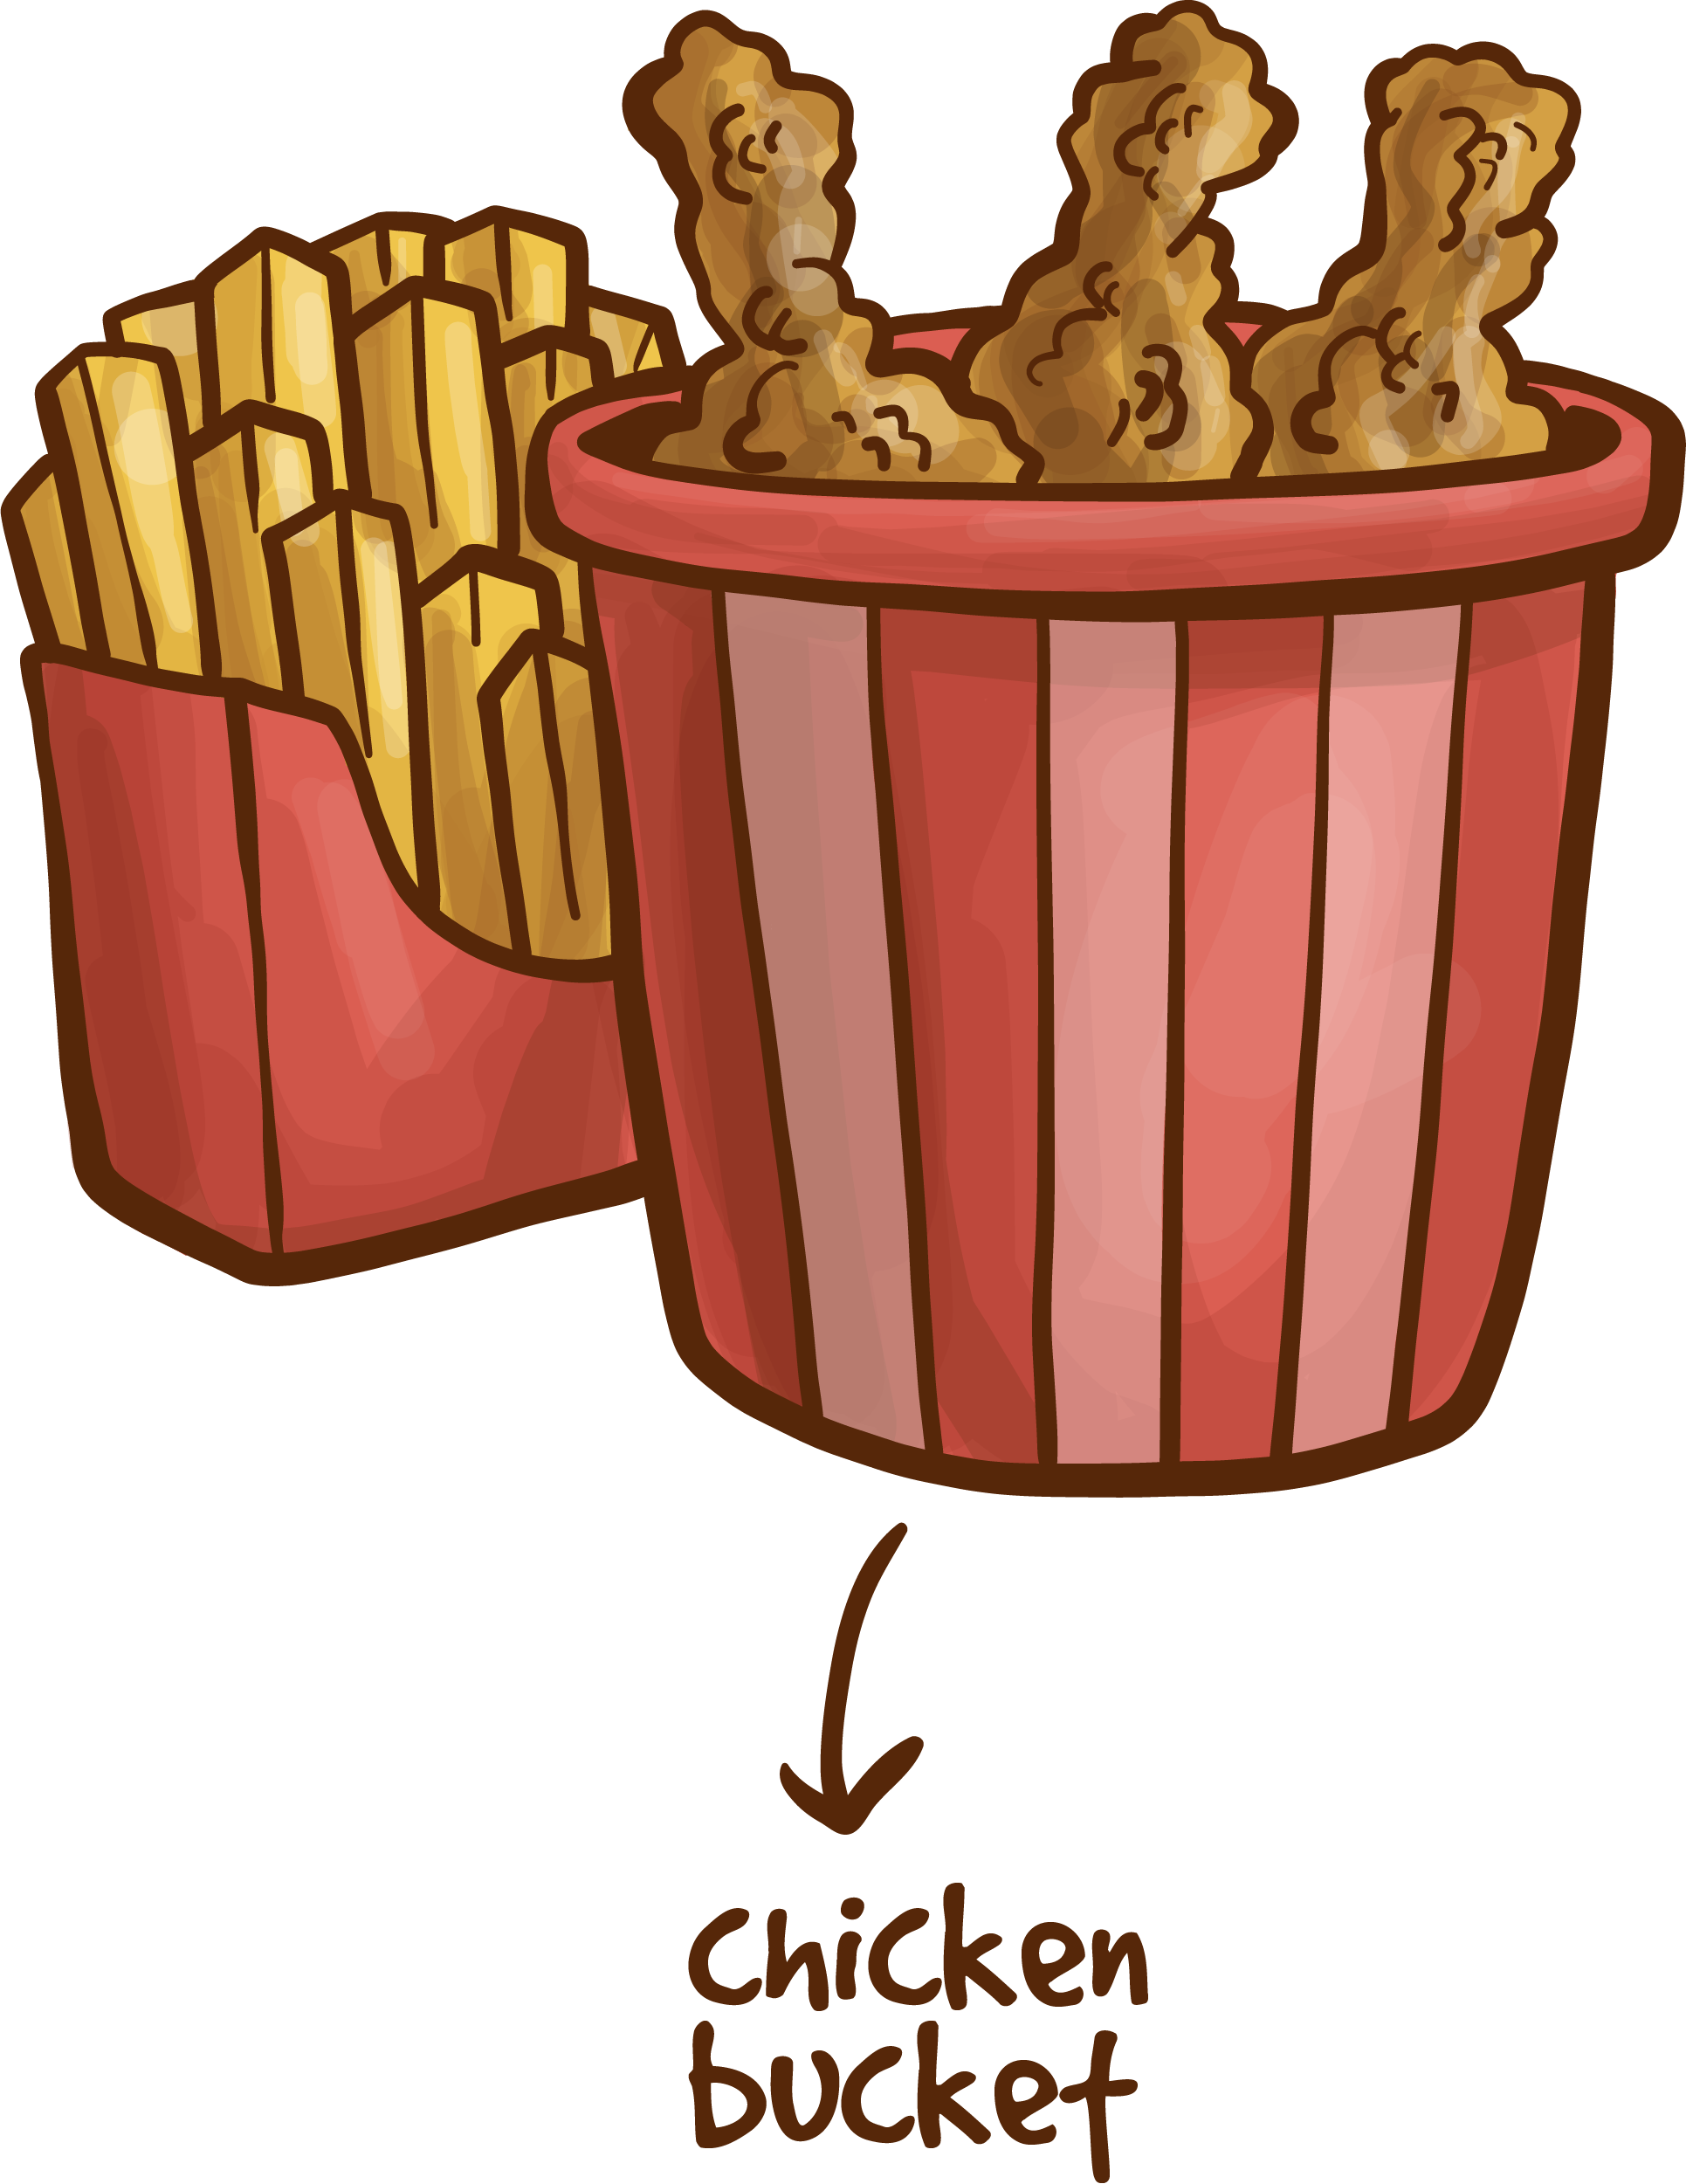 Fries clipart basket fry. Fried chicken fast food